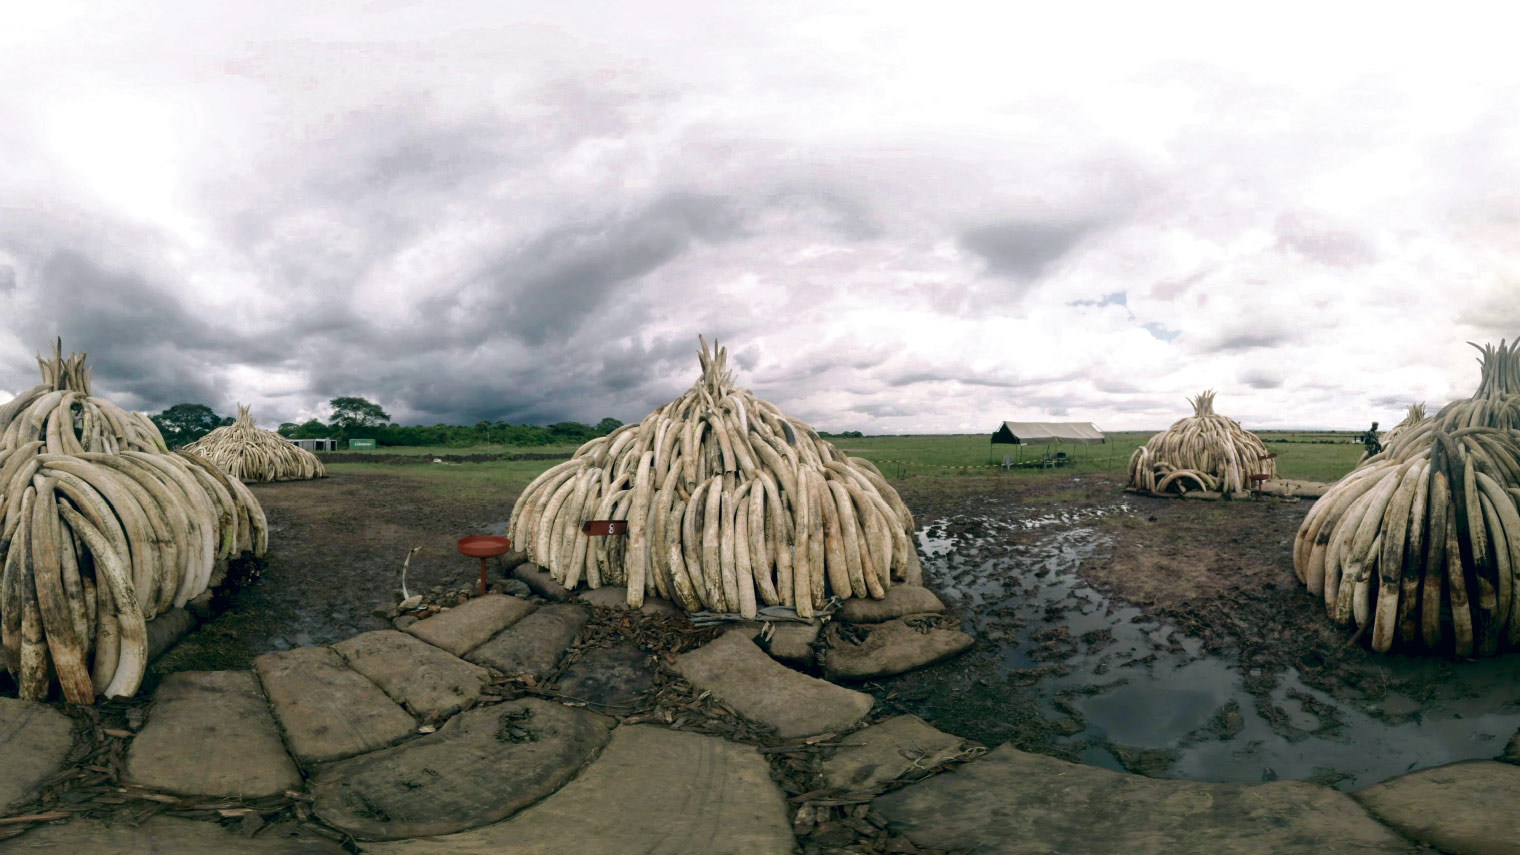 Bryn Mooser of VR studio RYOT filming a bonfire of ivory stockpiles in Kenya in April as the government crack down on illegal ivory trade